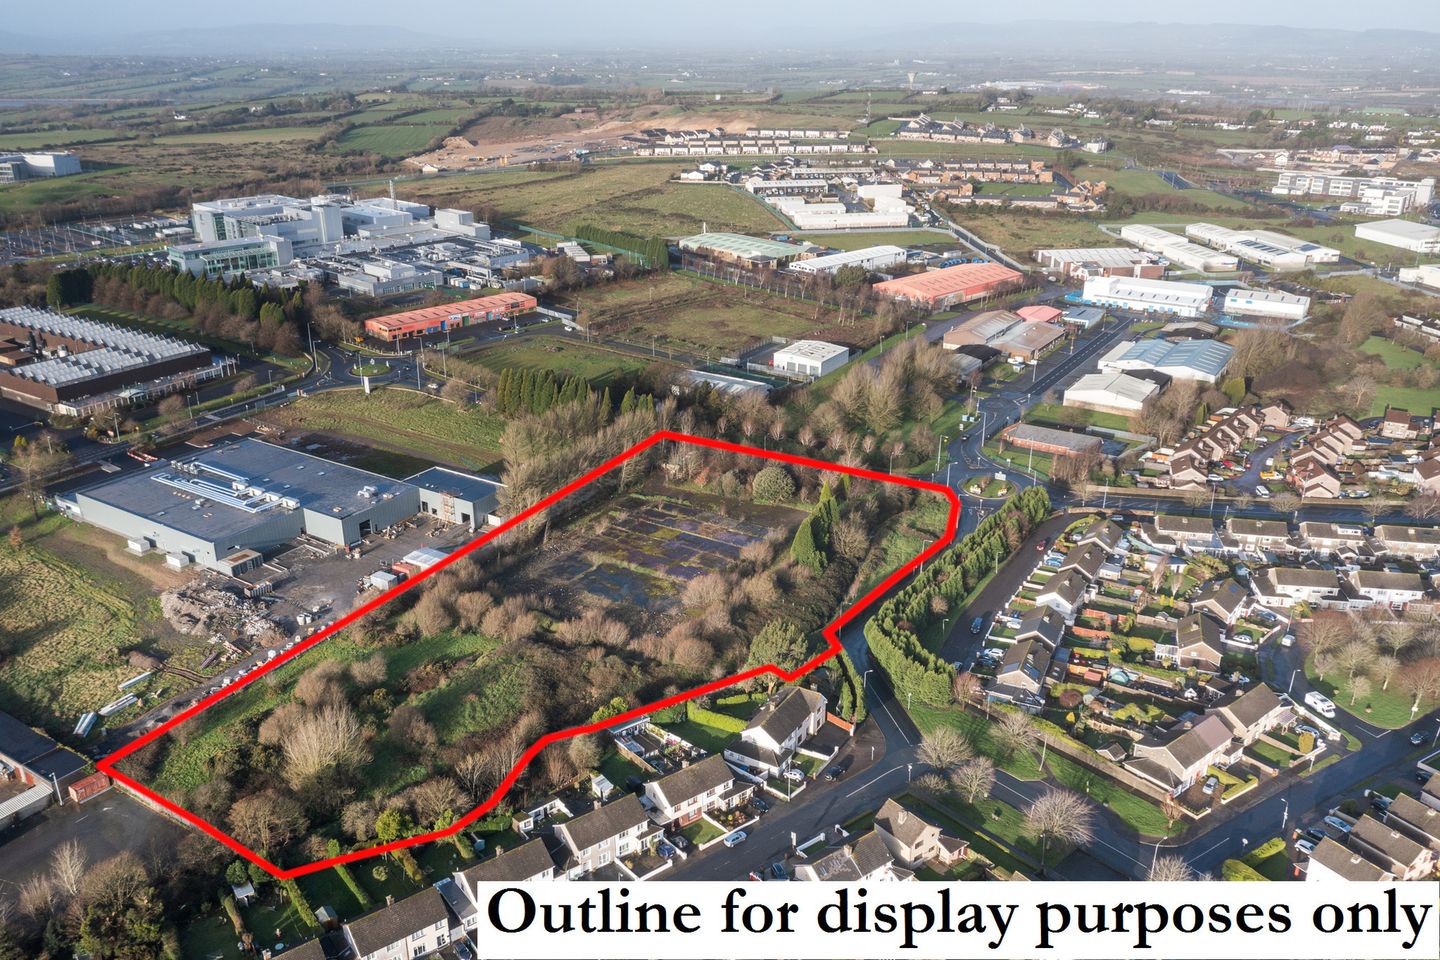 C. 5 Acre Site, Old Molloy Factory, Cleaboy Road, Waterford, Waterford City, Co. Waterford